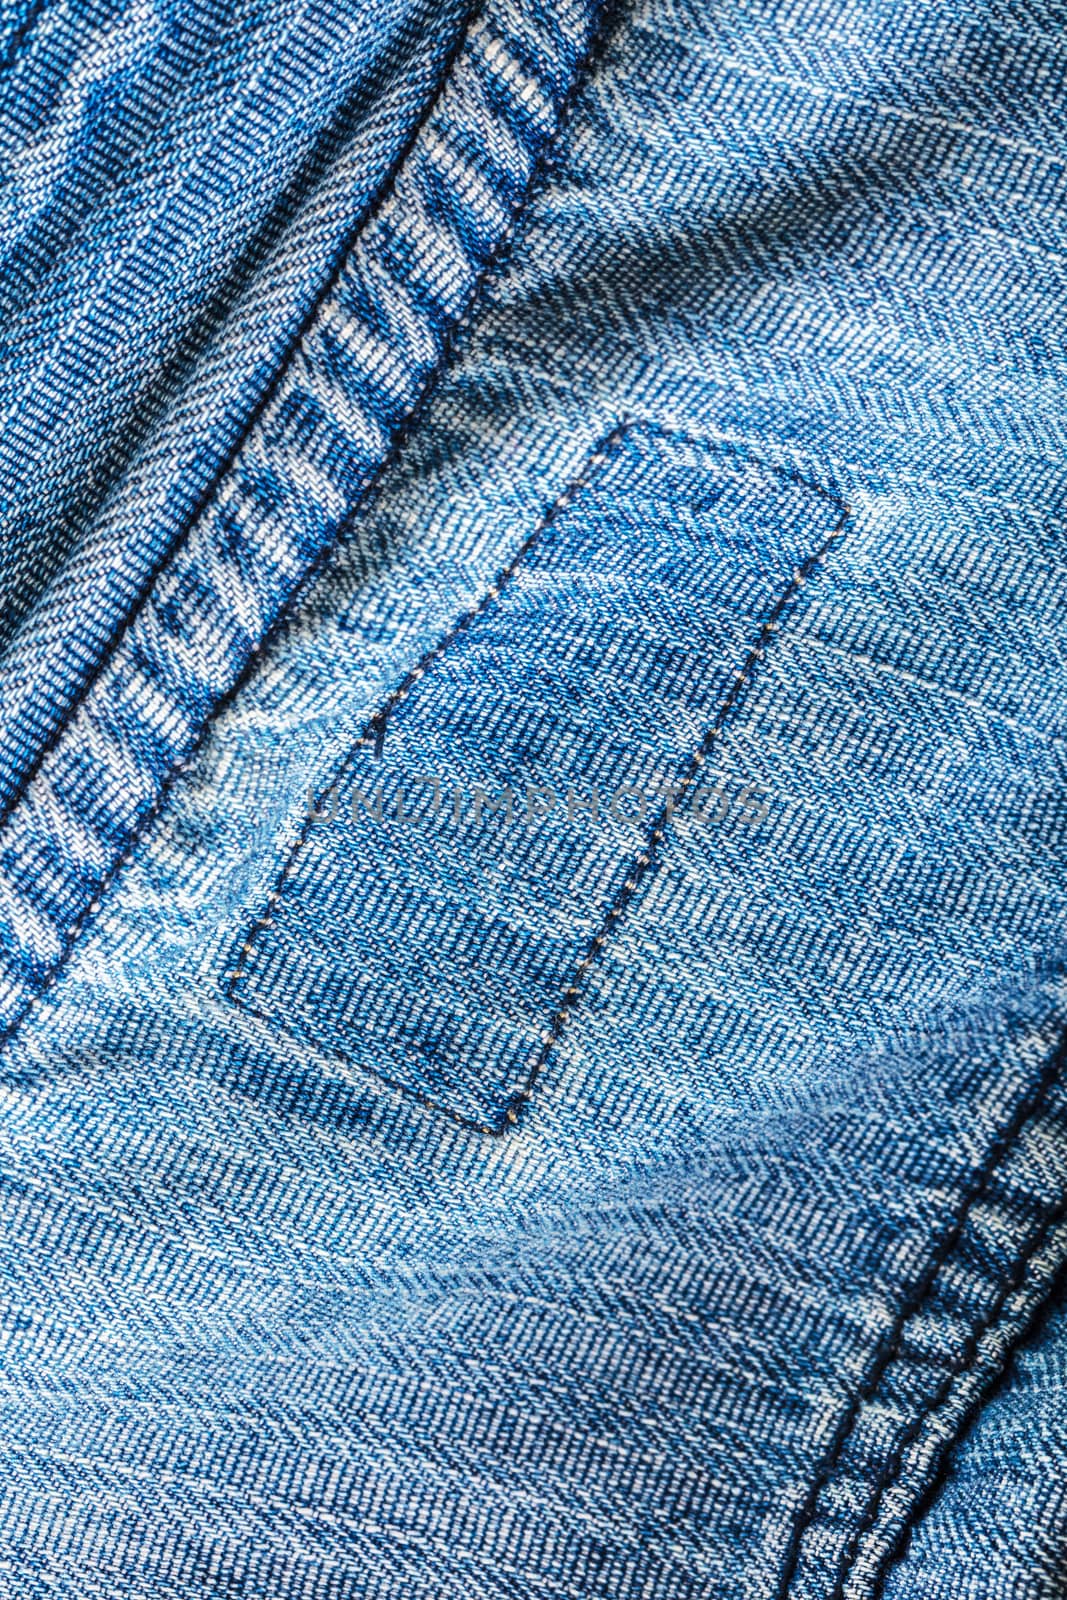 texture of denim cloth close-up by MegaArt